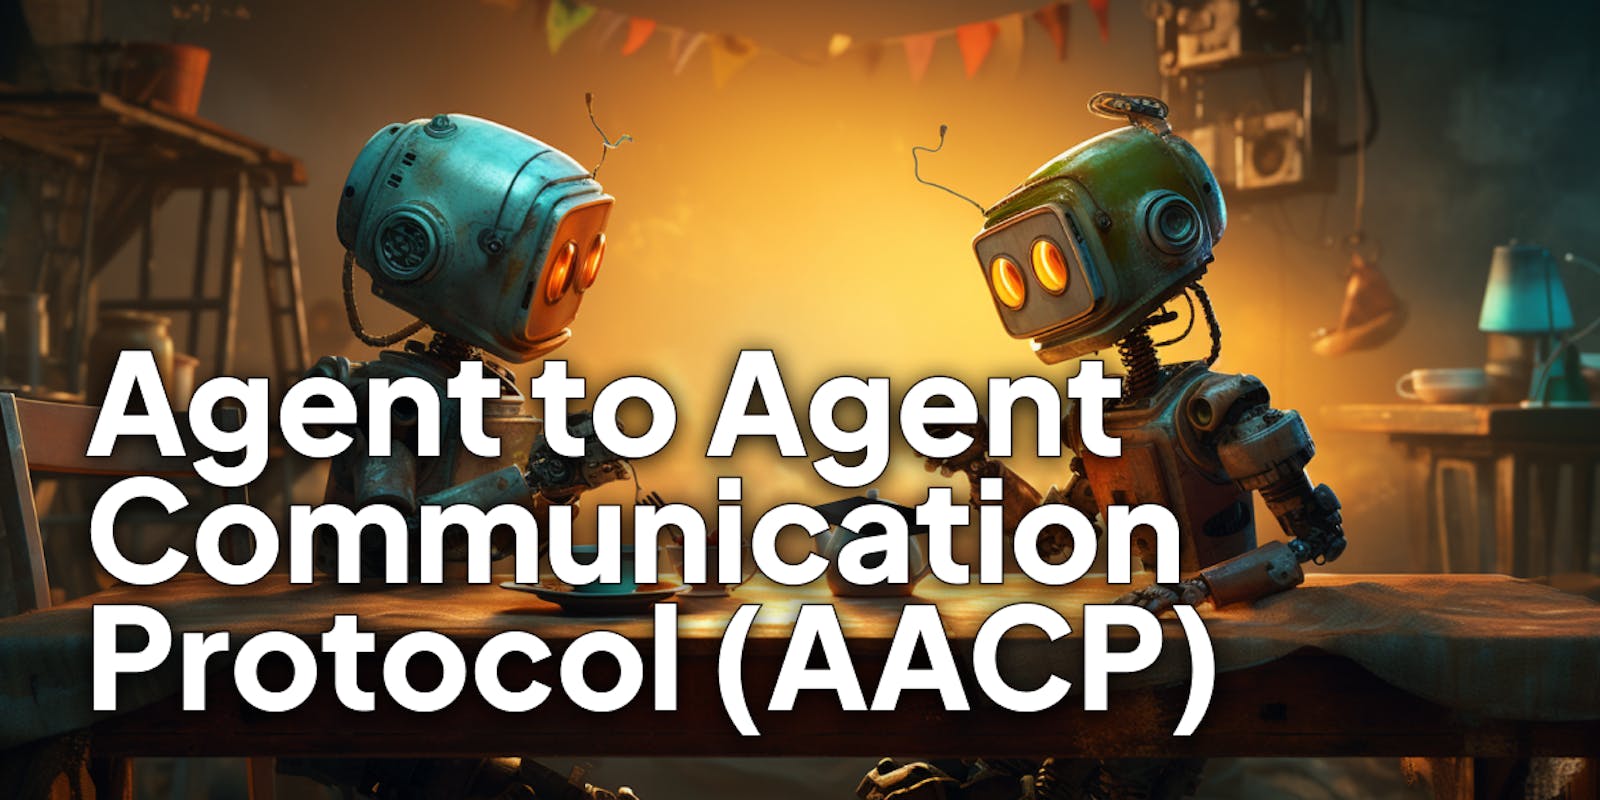 Introducing AACP (Agent to Agent Communication Protocol)